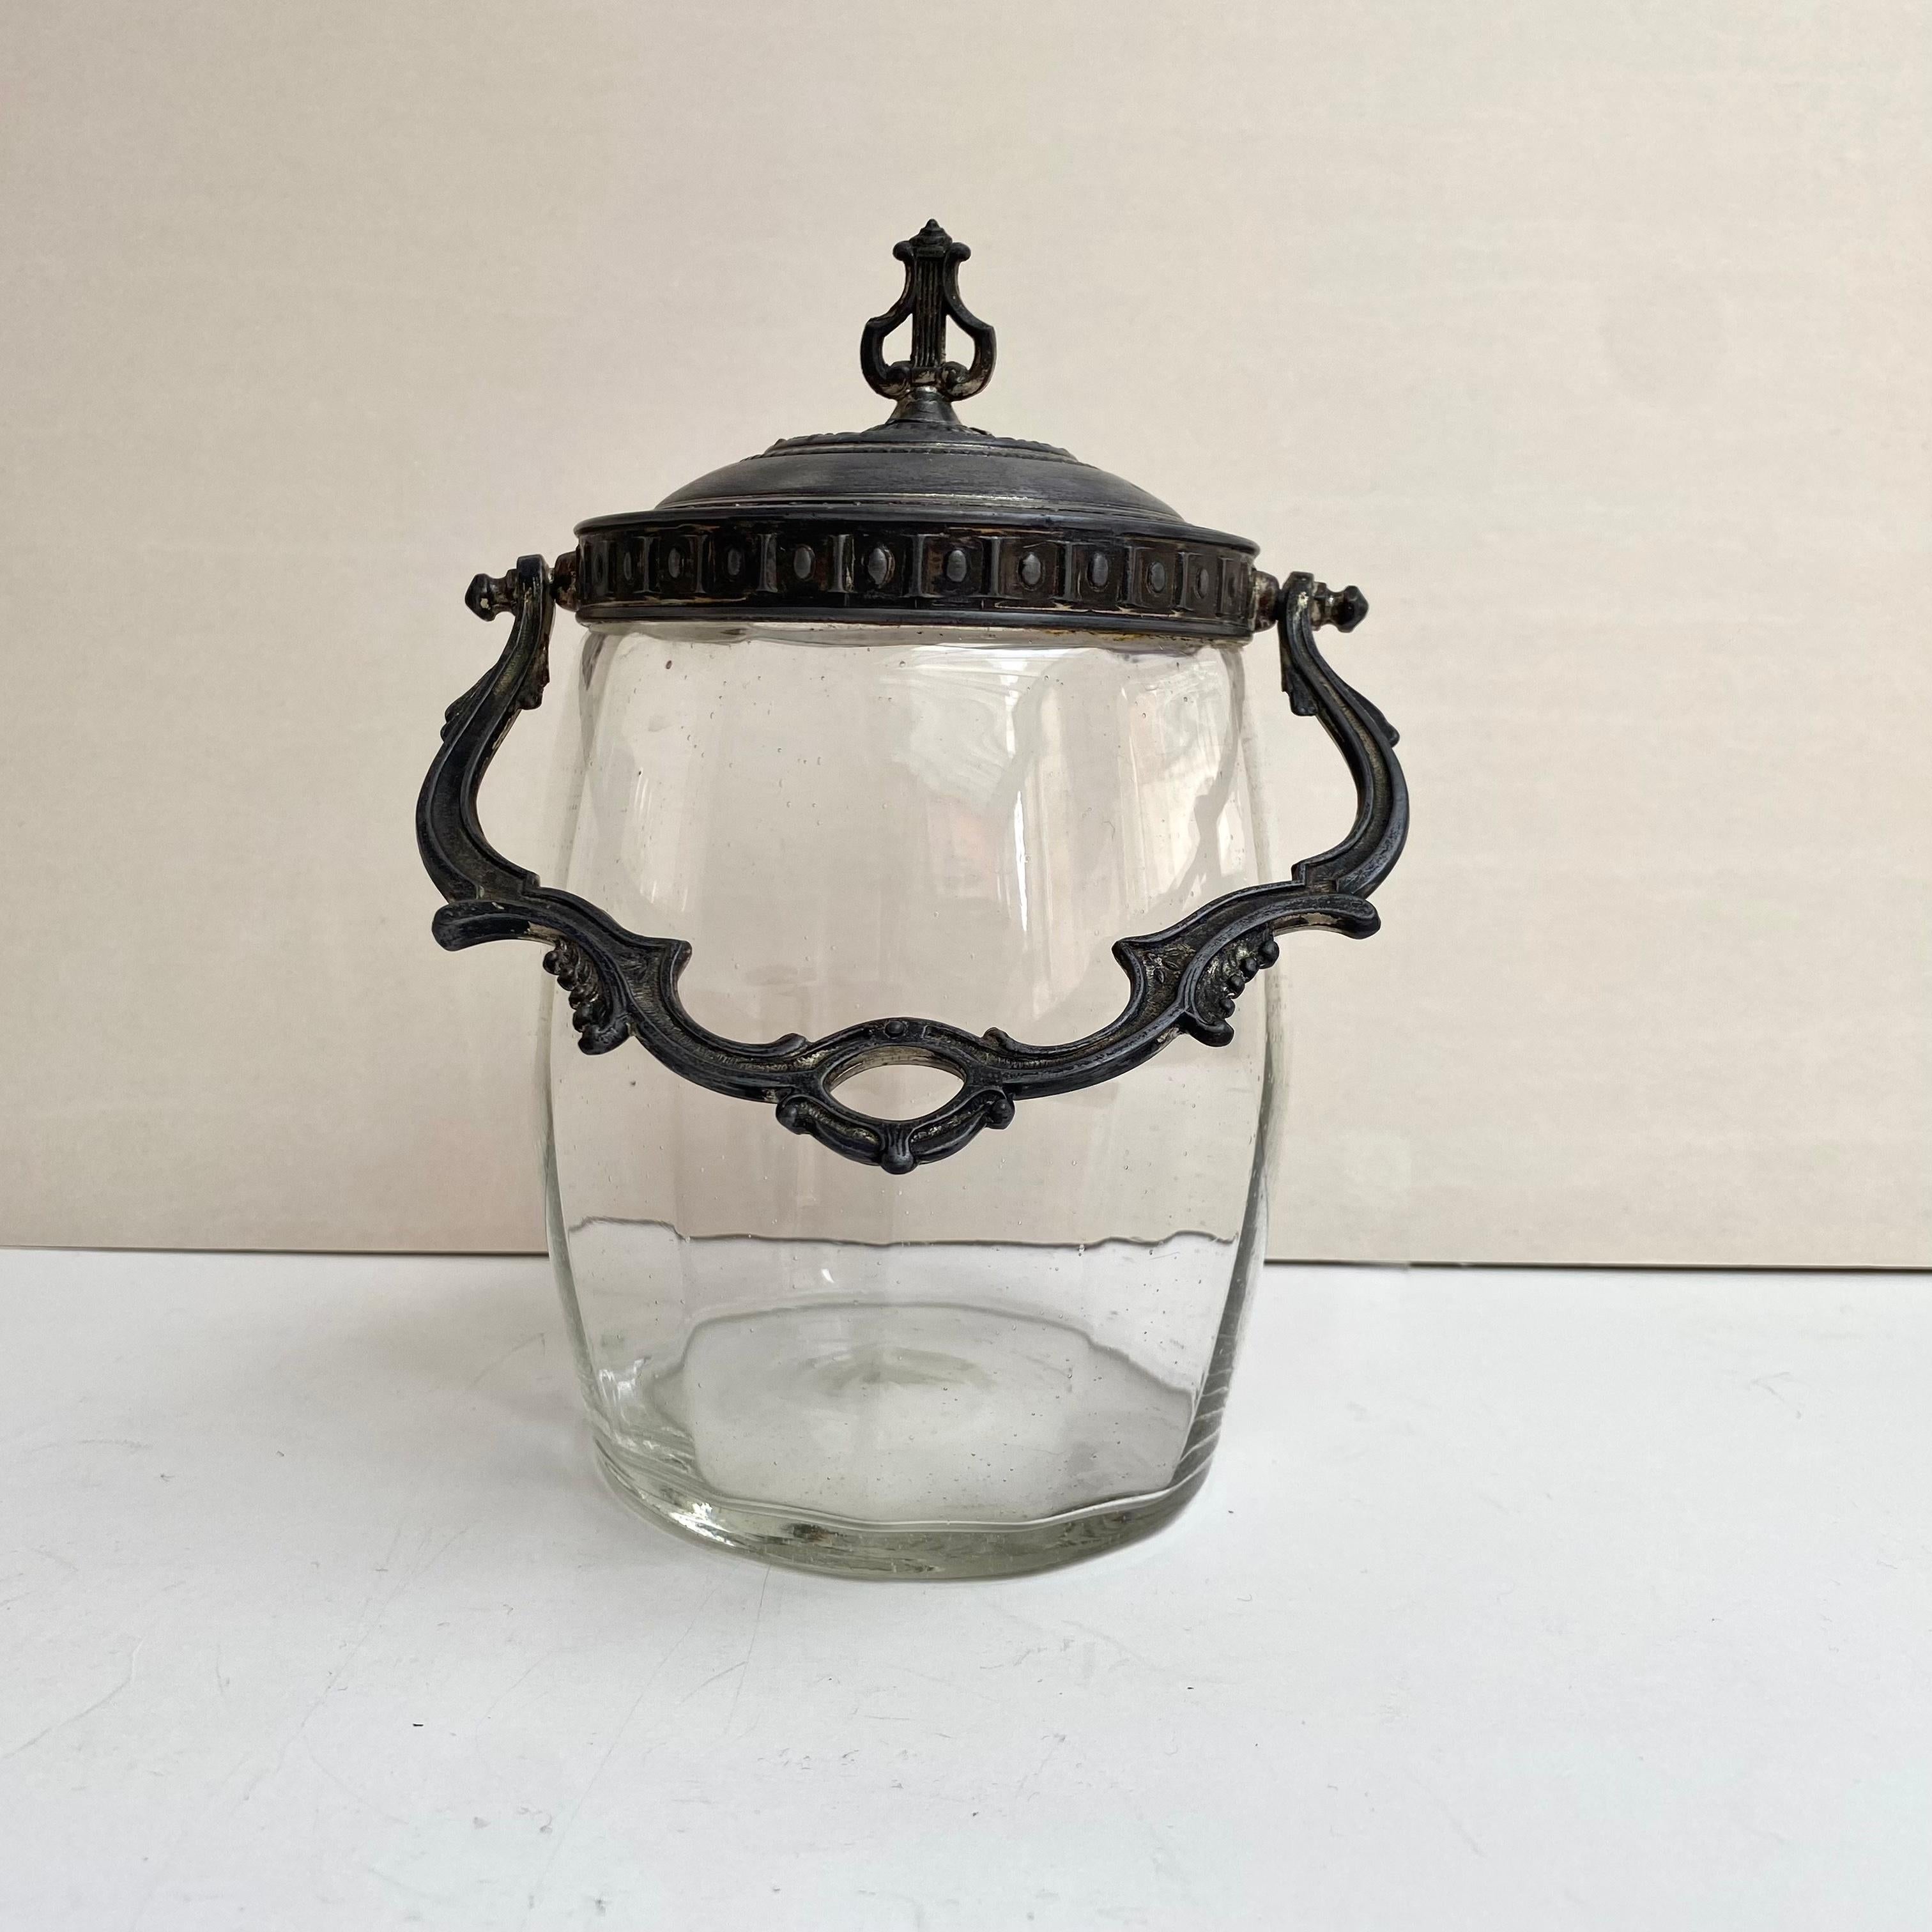 This is remarkably designed Antique cookie jar that would leave your kitchen looking classy and give it a good transition in quality and taste.

This is a metal and glass cookie jar from France, the lid and handle are made of brass and the body of